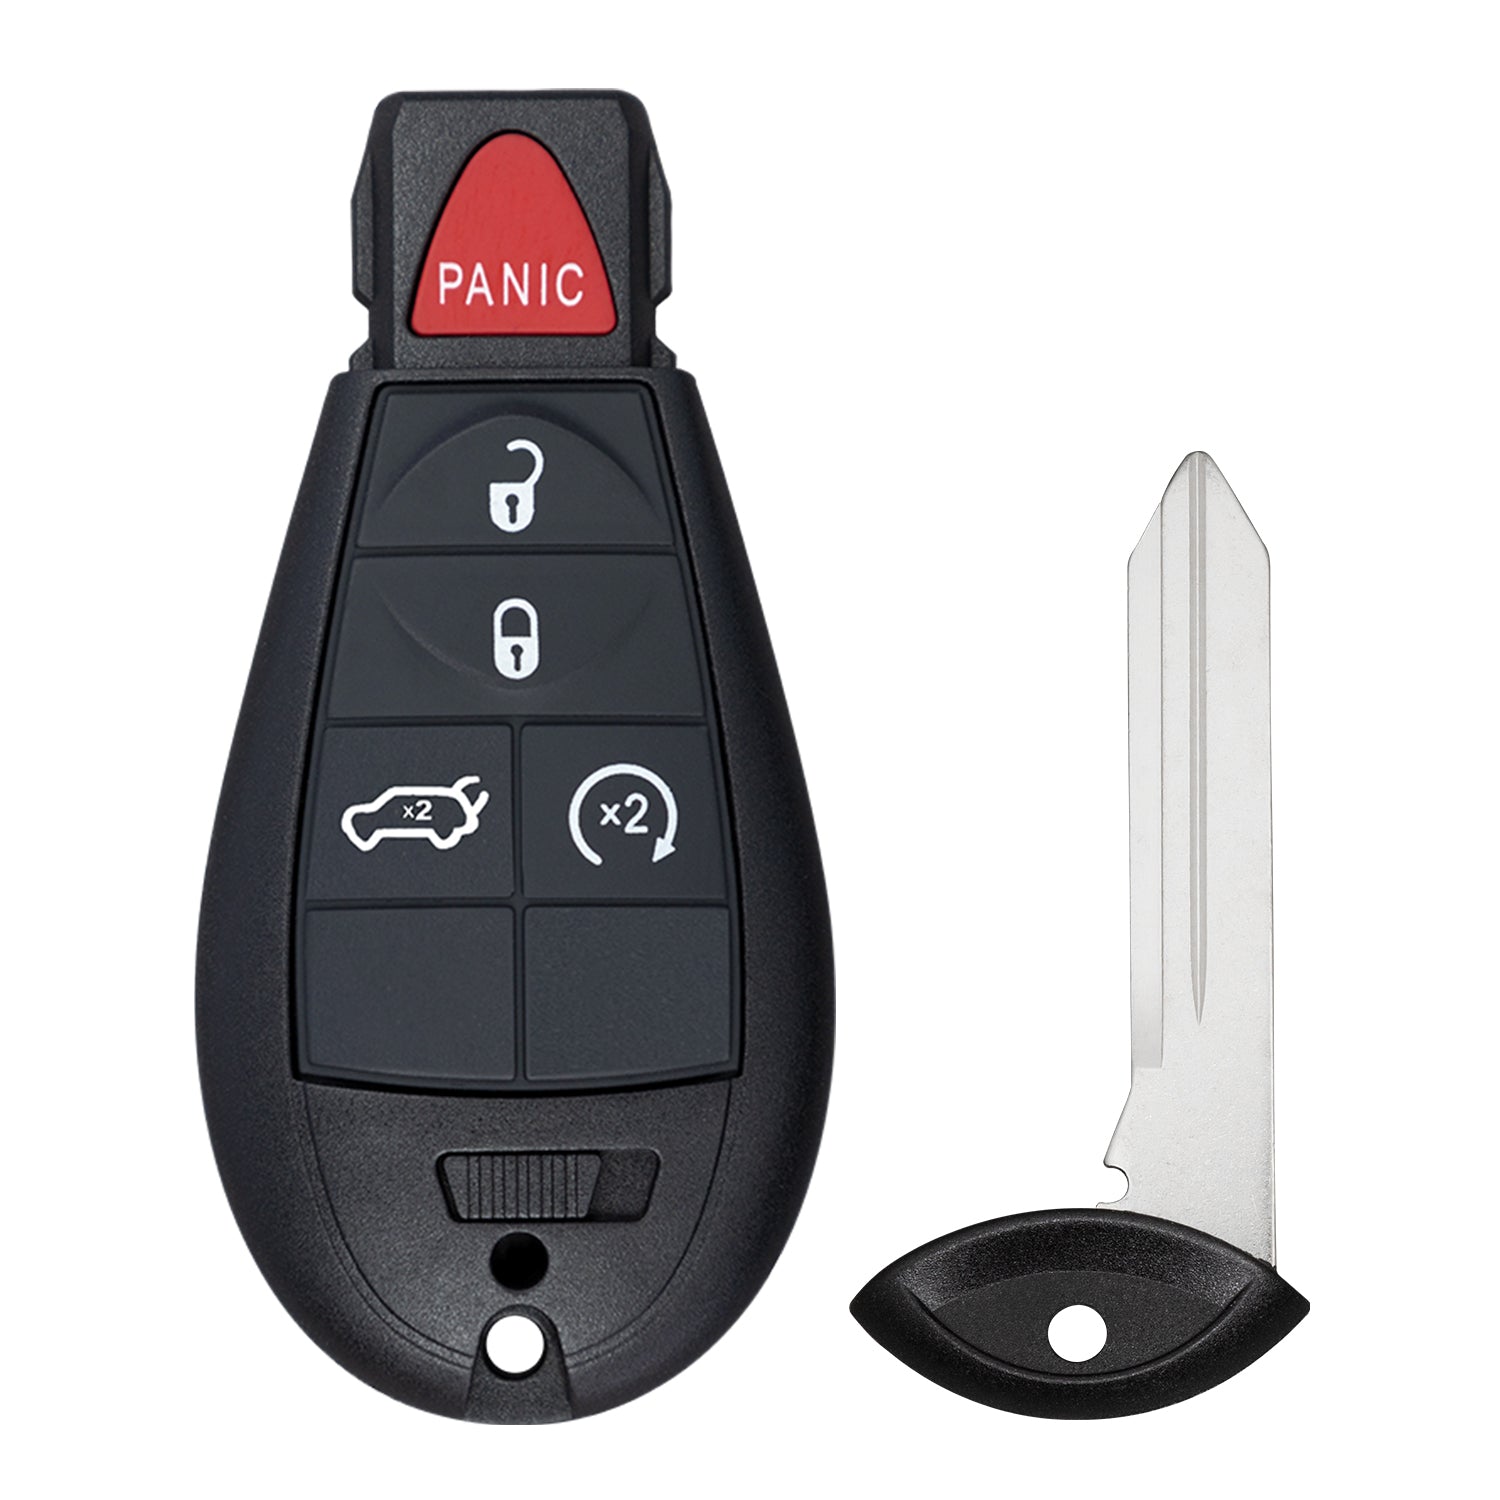 Car Key Fob Keyless Entry Remote for Jeep Cherokee 2014 2015 2016 2017 2018 2019 2020 2021 GQ4-53T (5 Button Hatch)